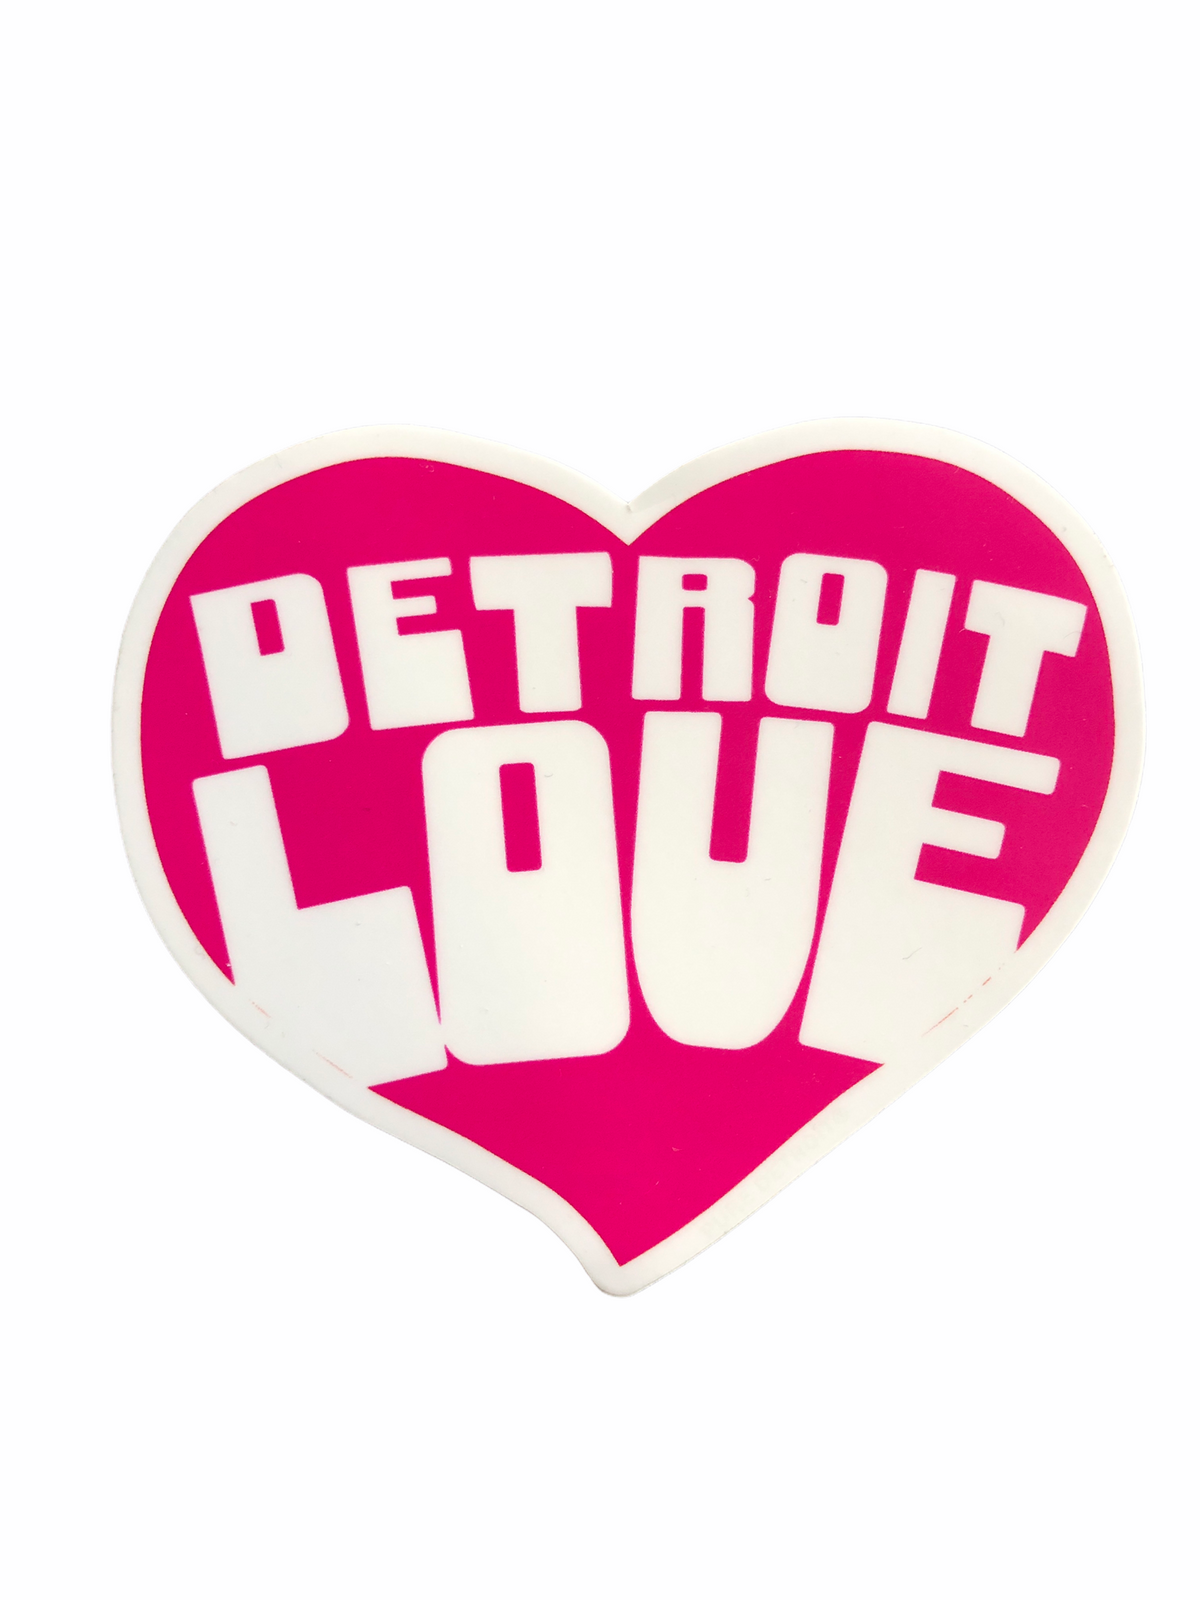 Detroit Love Decal / White + Pink Decal   